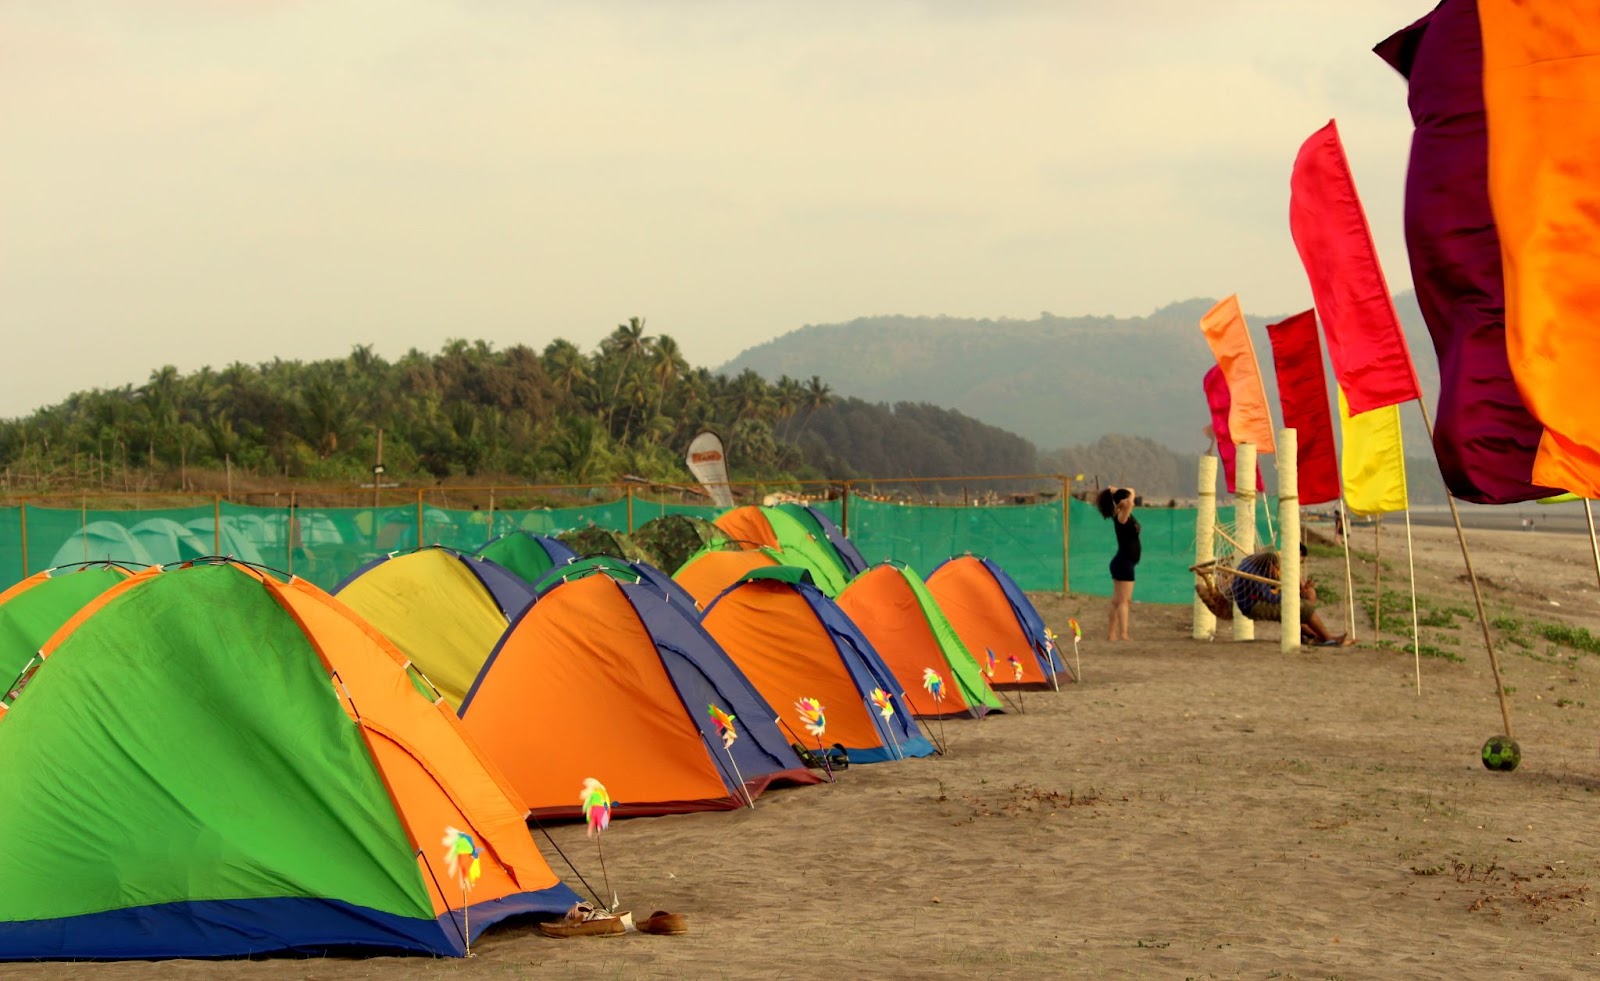 The best camping in mumbai for the perfect getaway - TechDailyIdeas